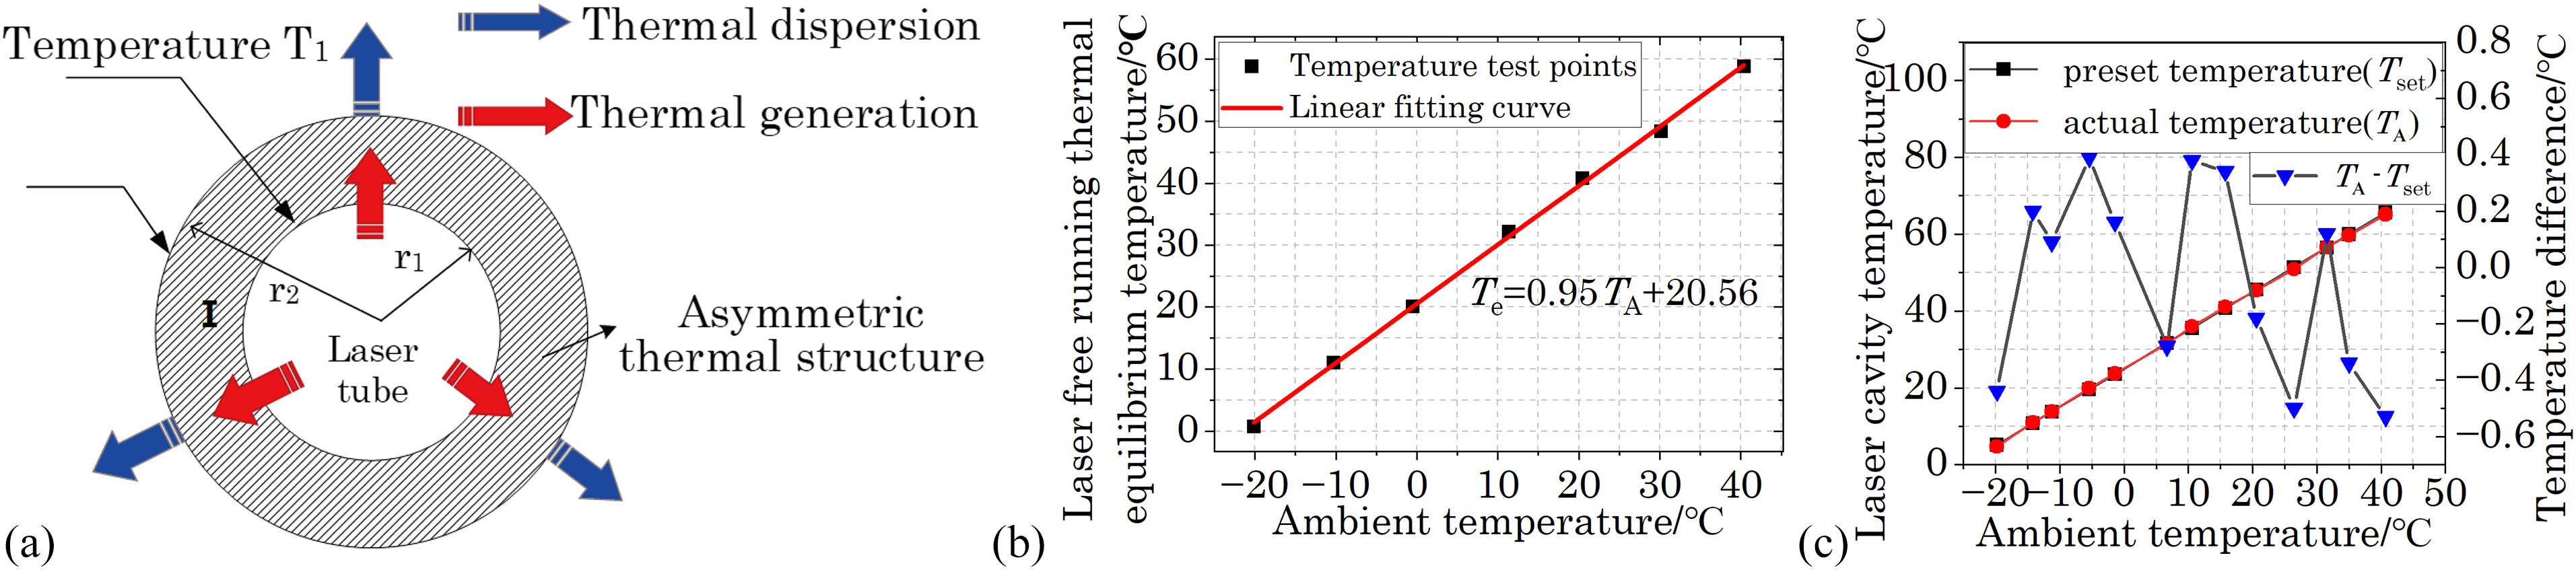 (a) Thermal equilibrium state; (b) thermal equilibrium temperature of the laser free-running experiment; (c) comparison of the preset temperature and actual temperature of the laser cavity.